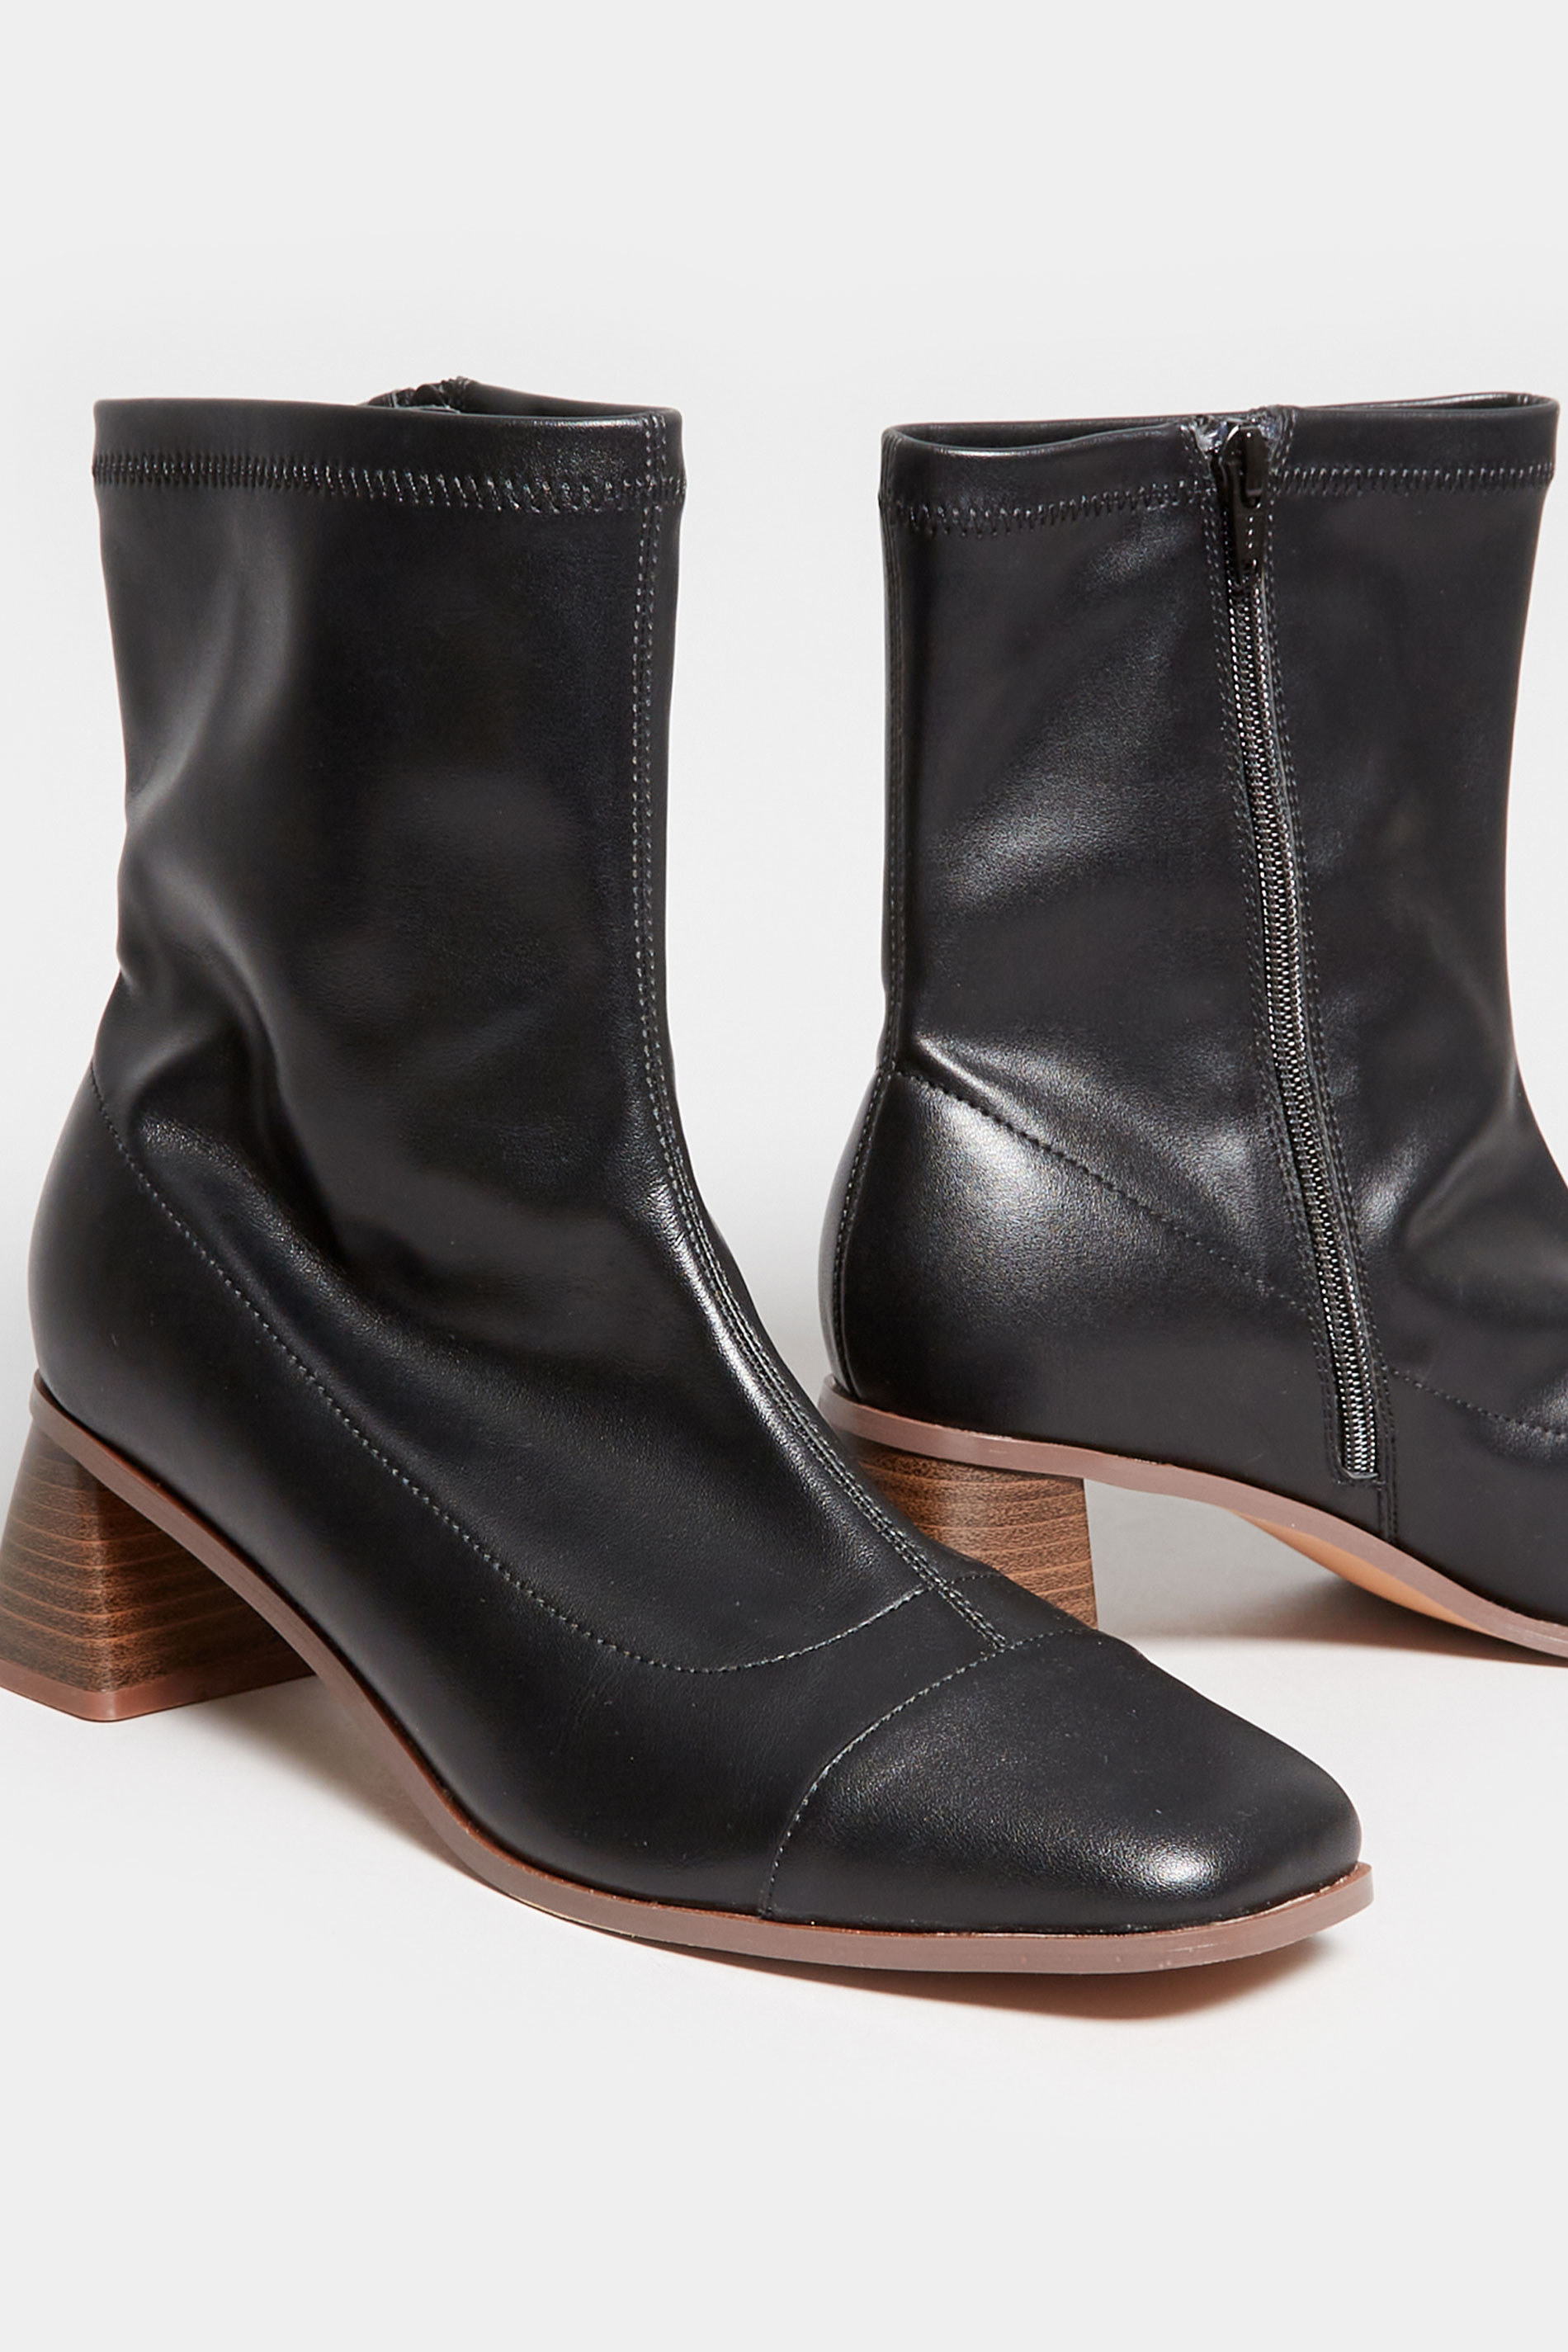 LIMITED COLLECTION Black Square Toe Block Heel Boots In Extra Wide EEE ...